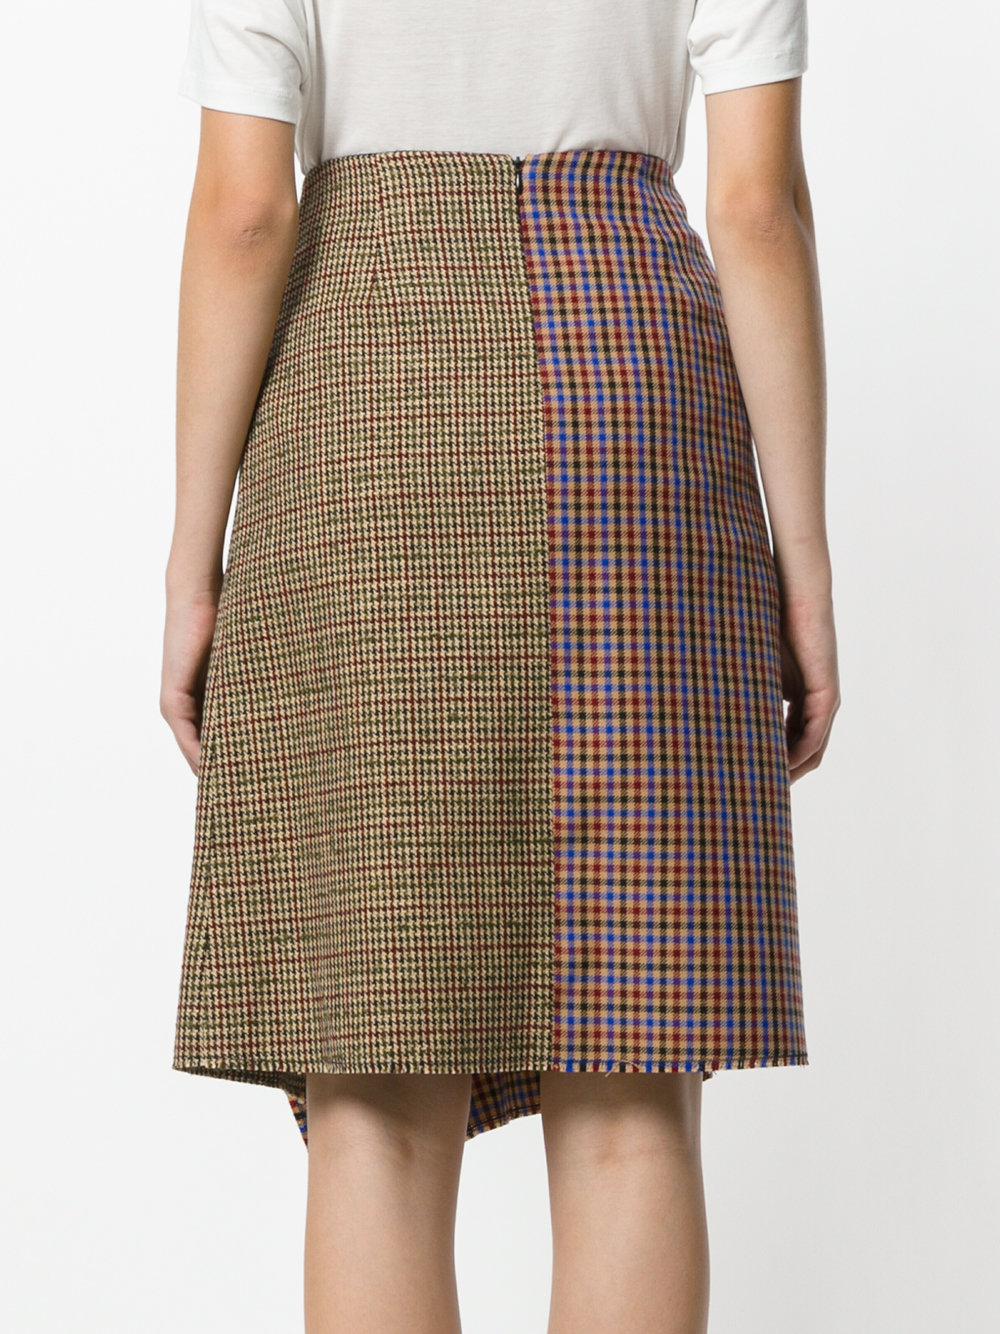 Golden Goose Deluxe Brand Wool Asymmetric Dogtooth Skirt in Brown - Lyst